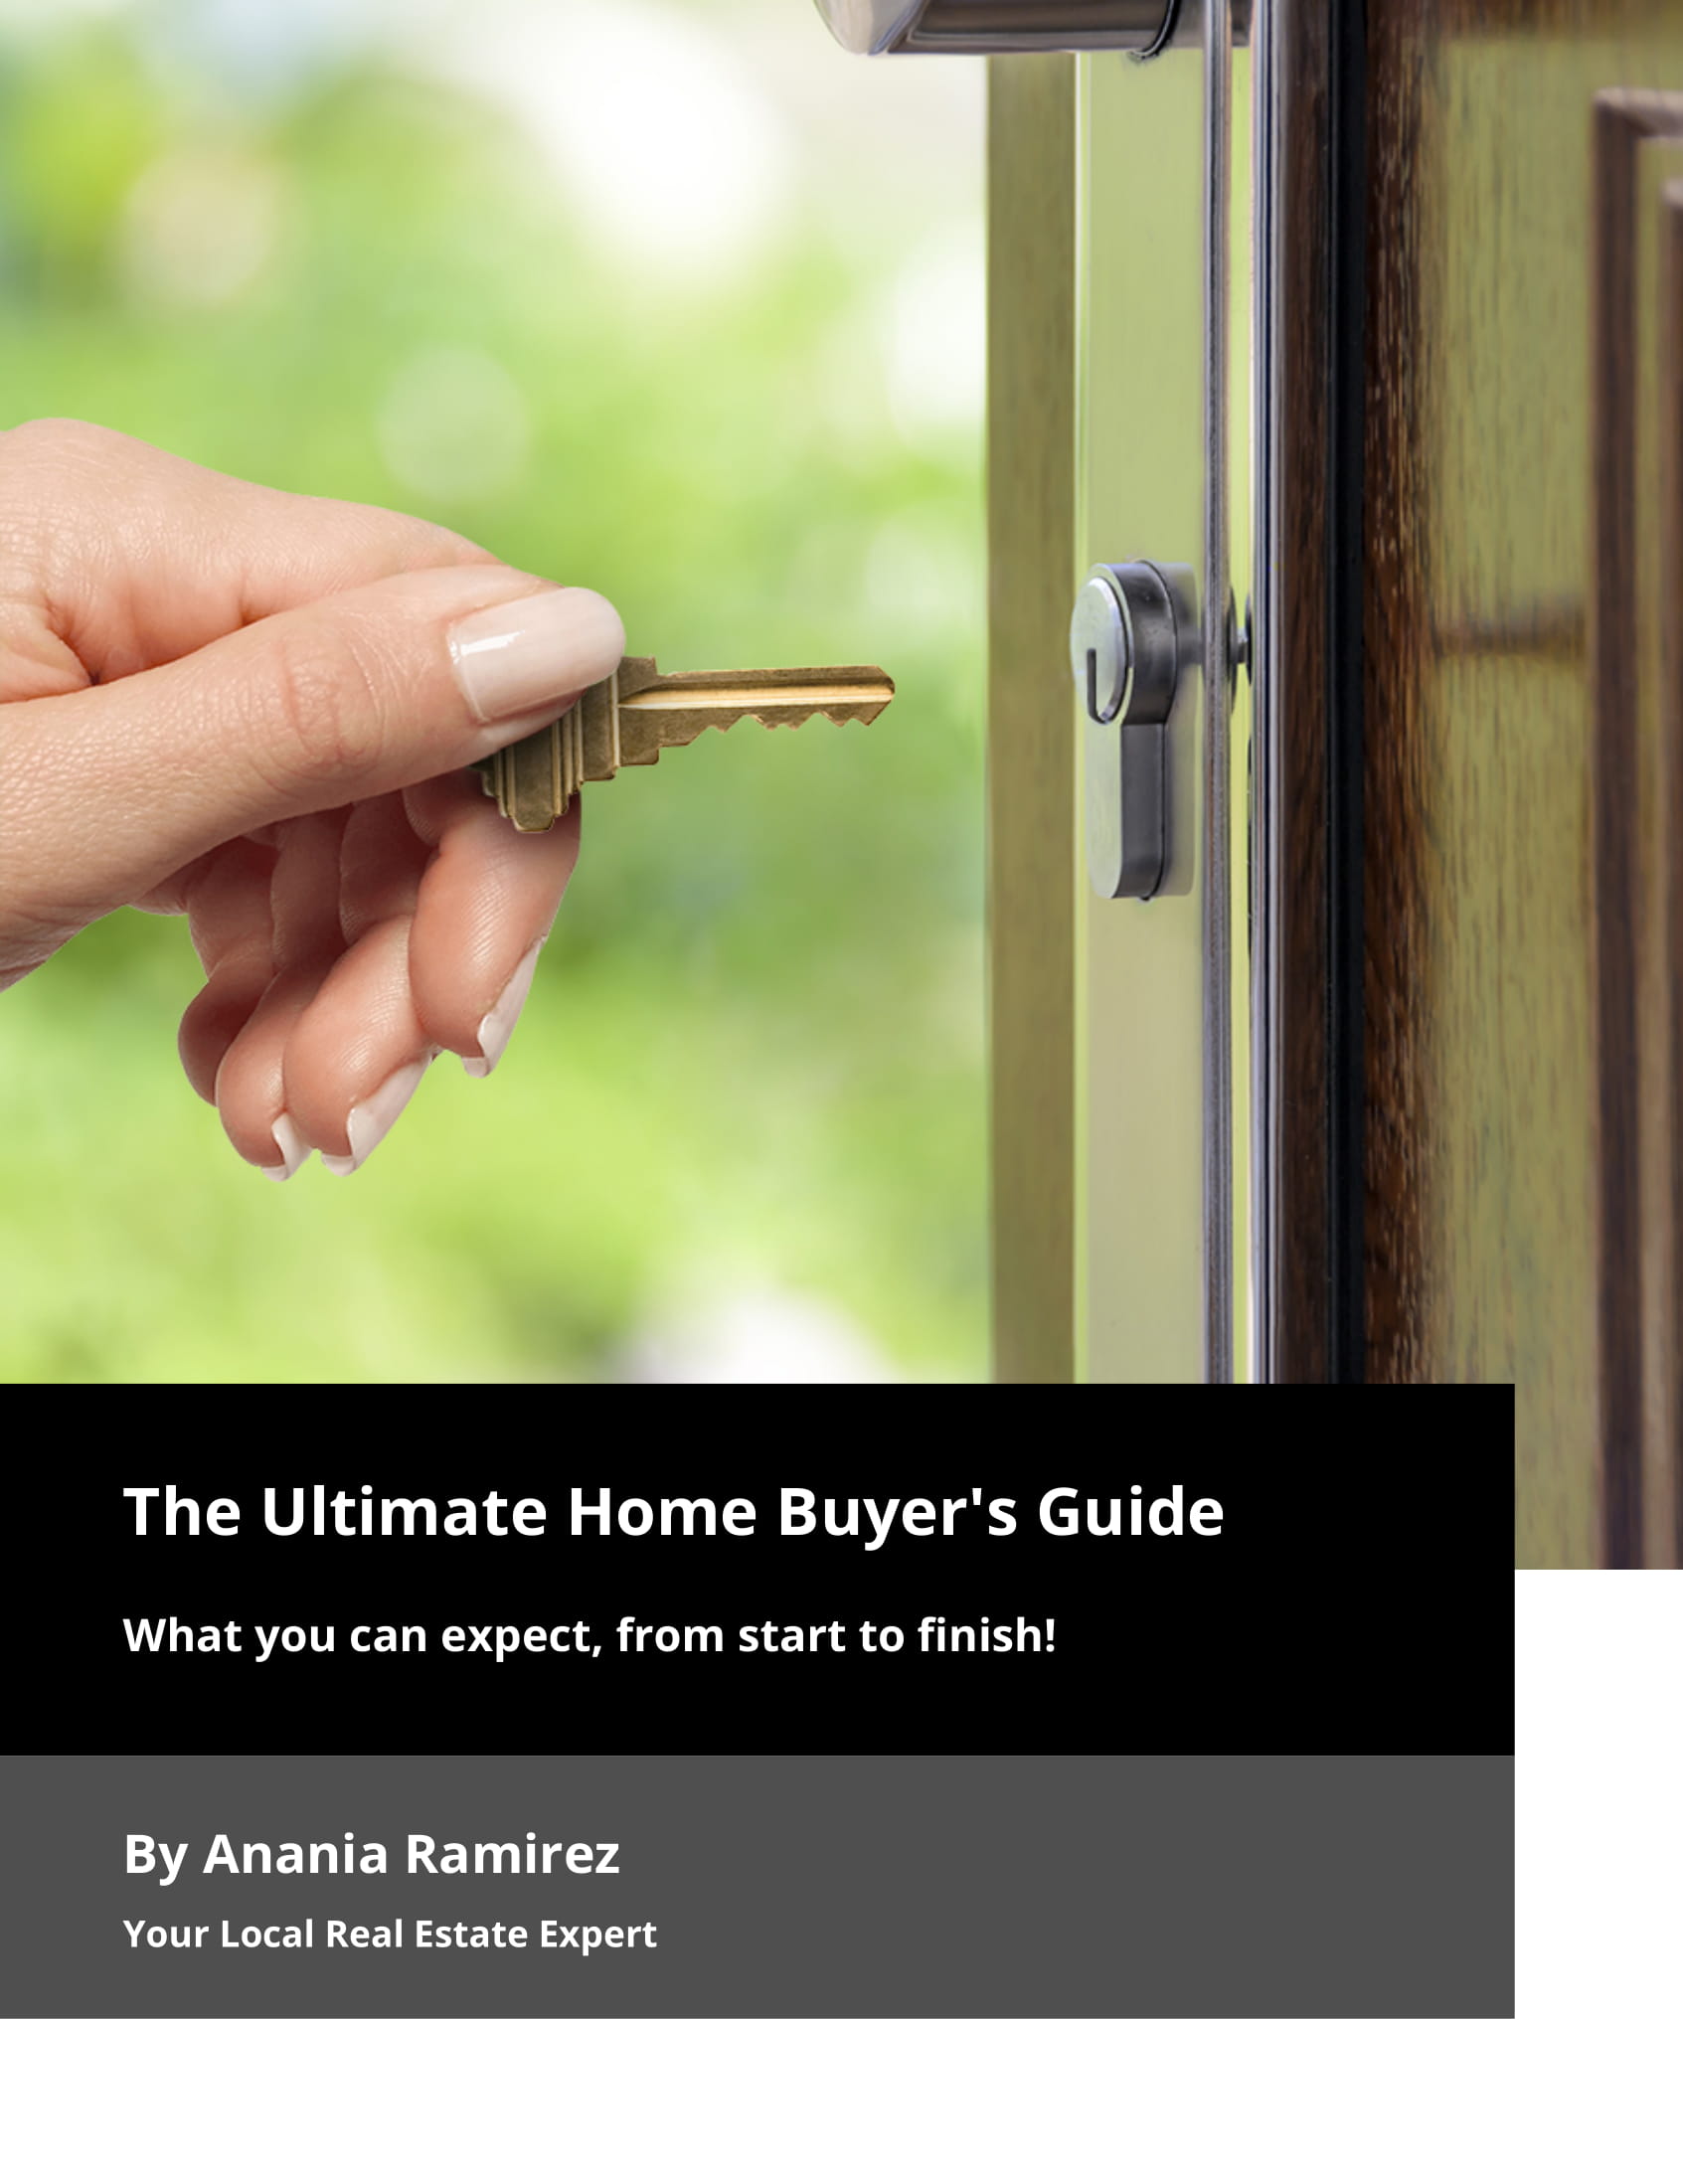 The Ultimate Home Buyer's Guide